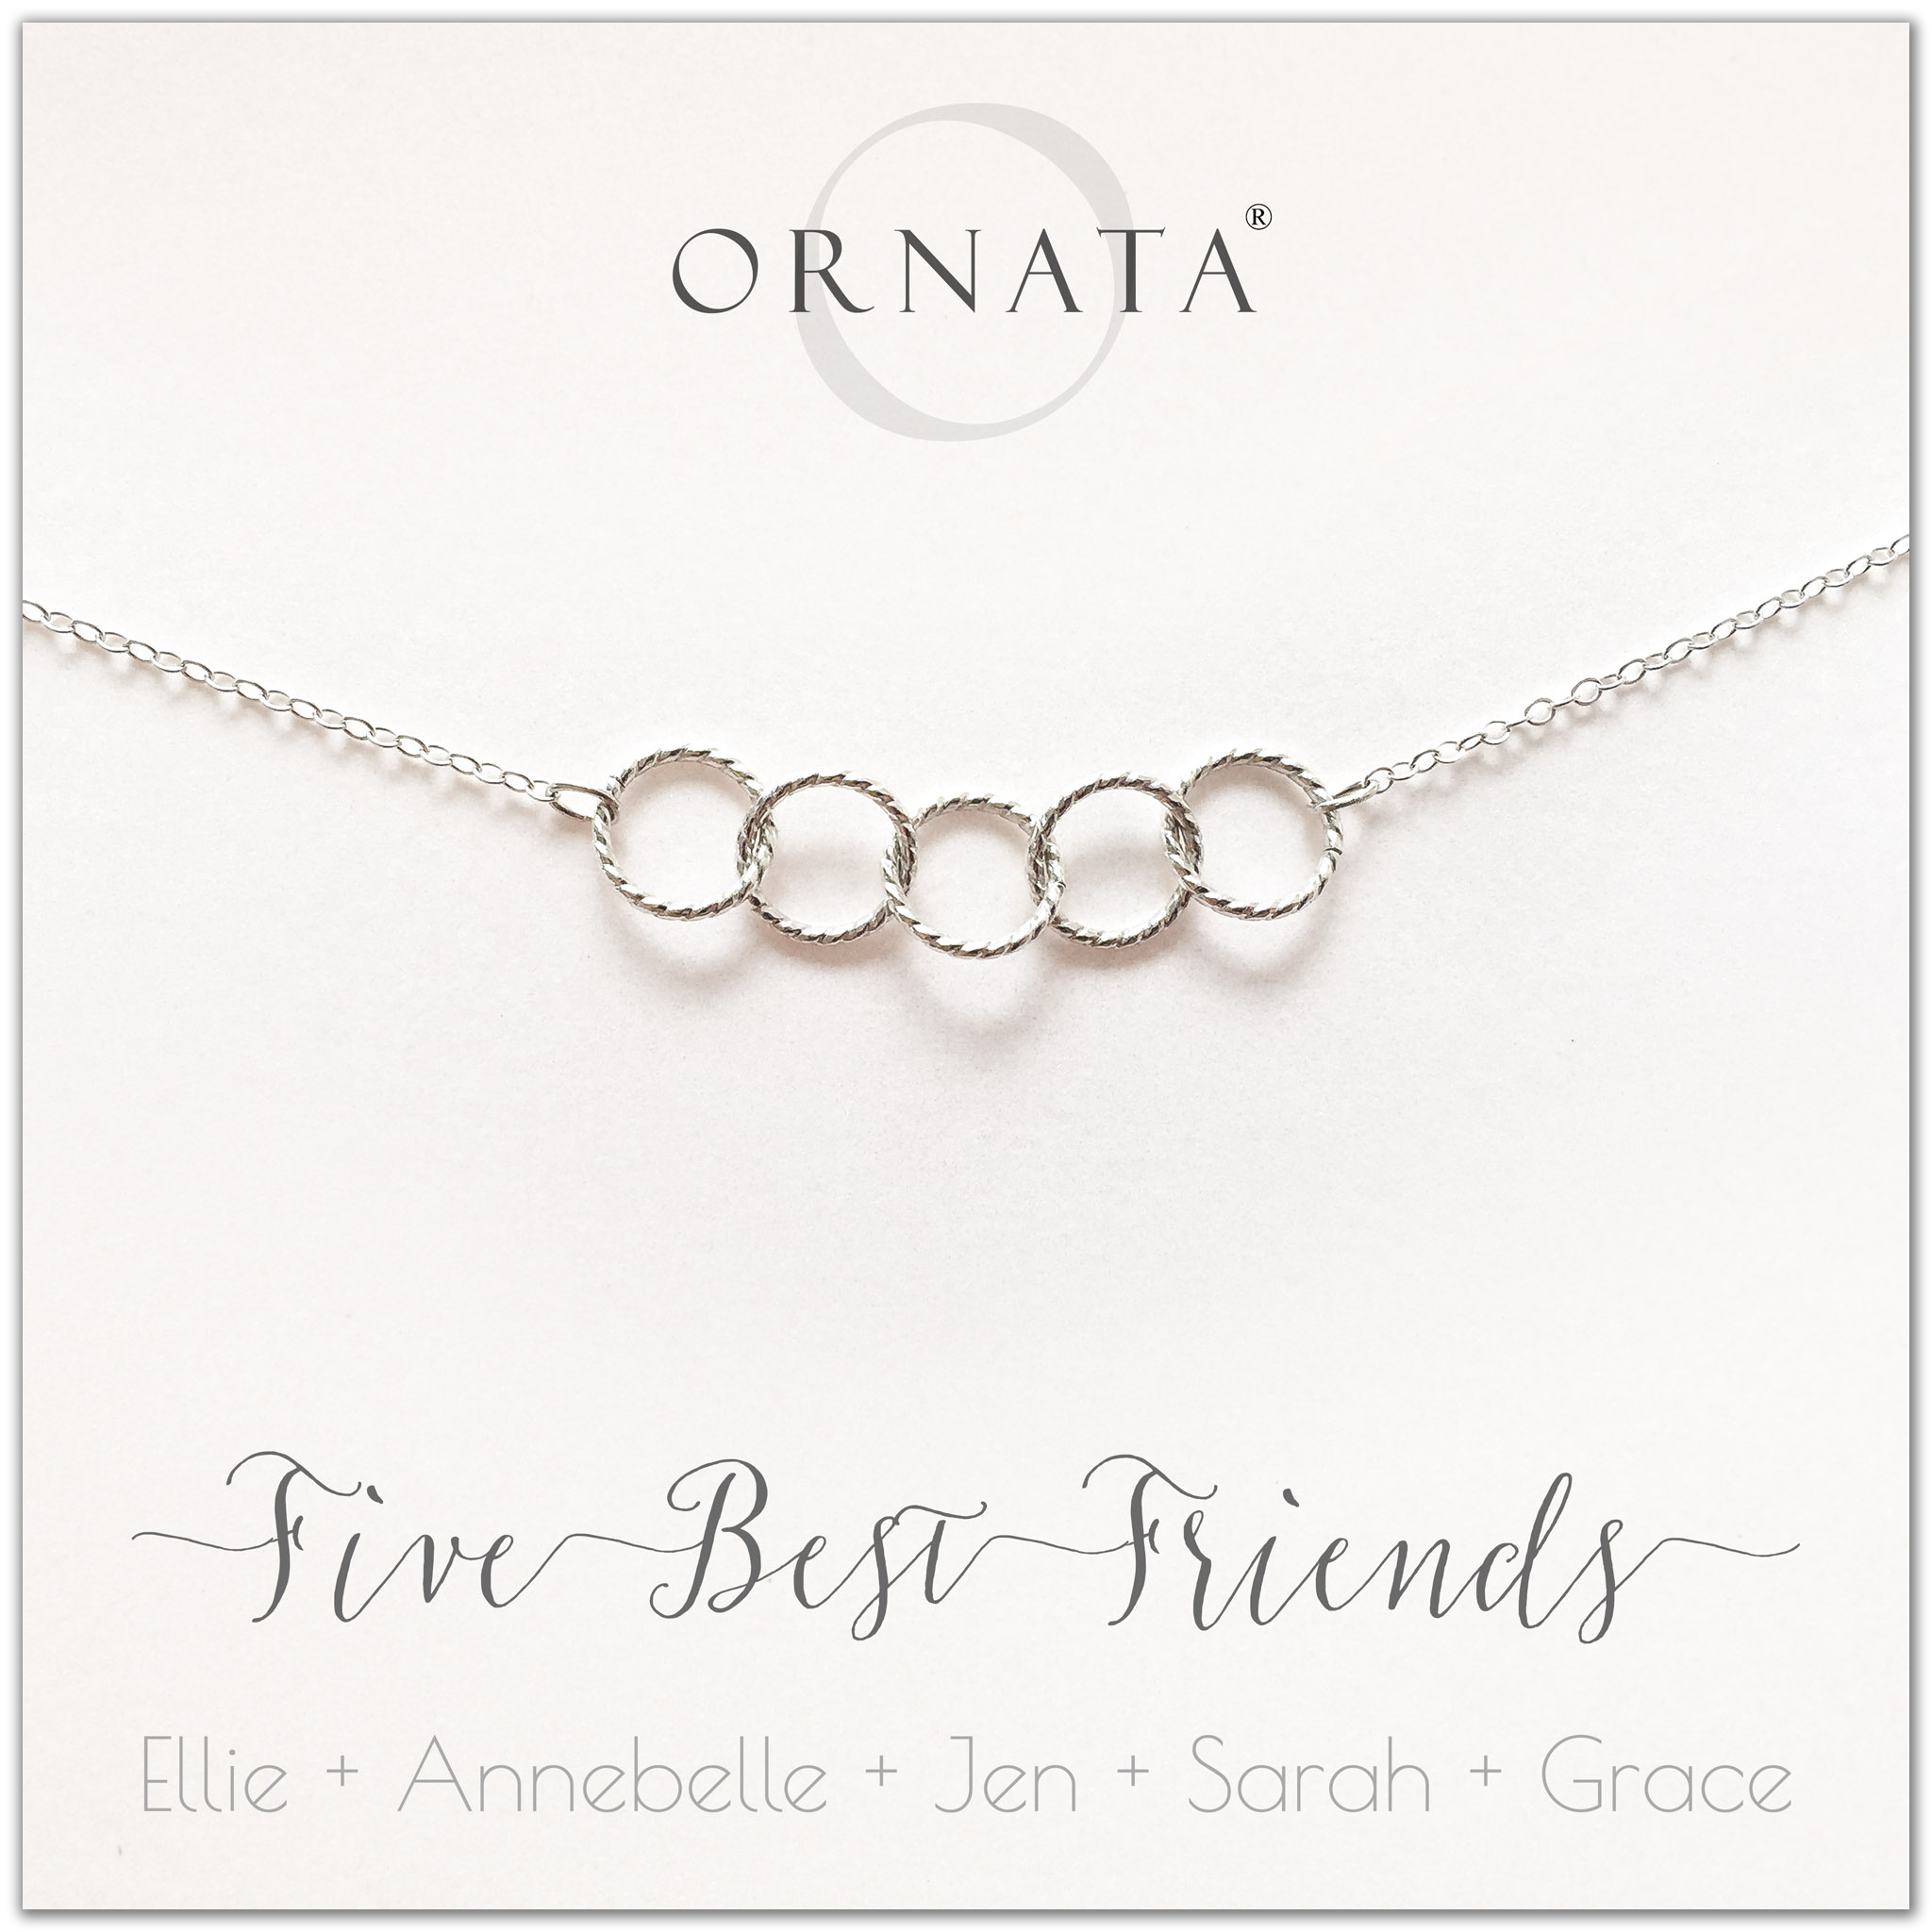 Personalized silver necklaces for five best friends. Our sterling silver custom jewelry is a perfect gift for a sister or best friend. Friendship necklaces for 5 best friends. Represents 5 best friends with sterling silver interlocking rings. 